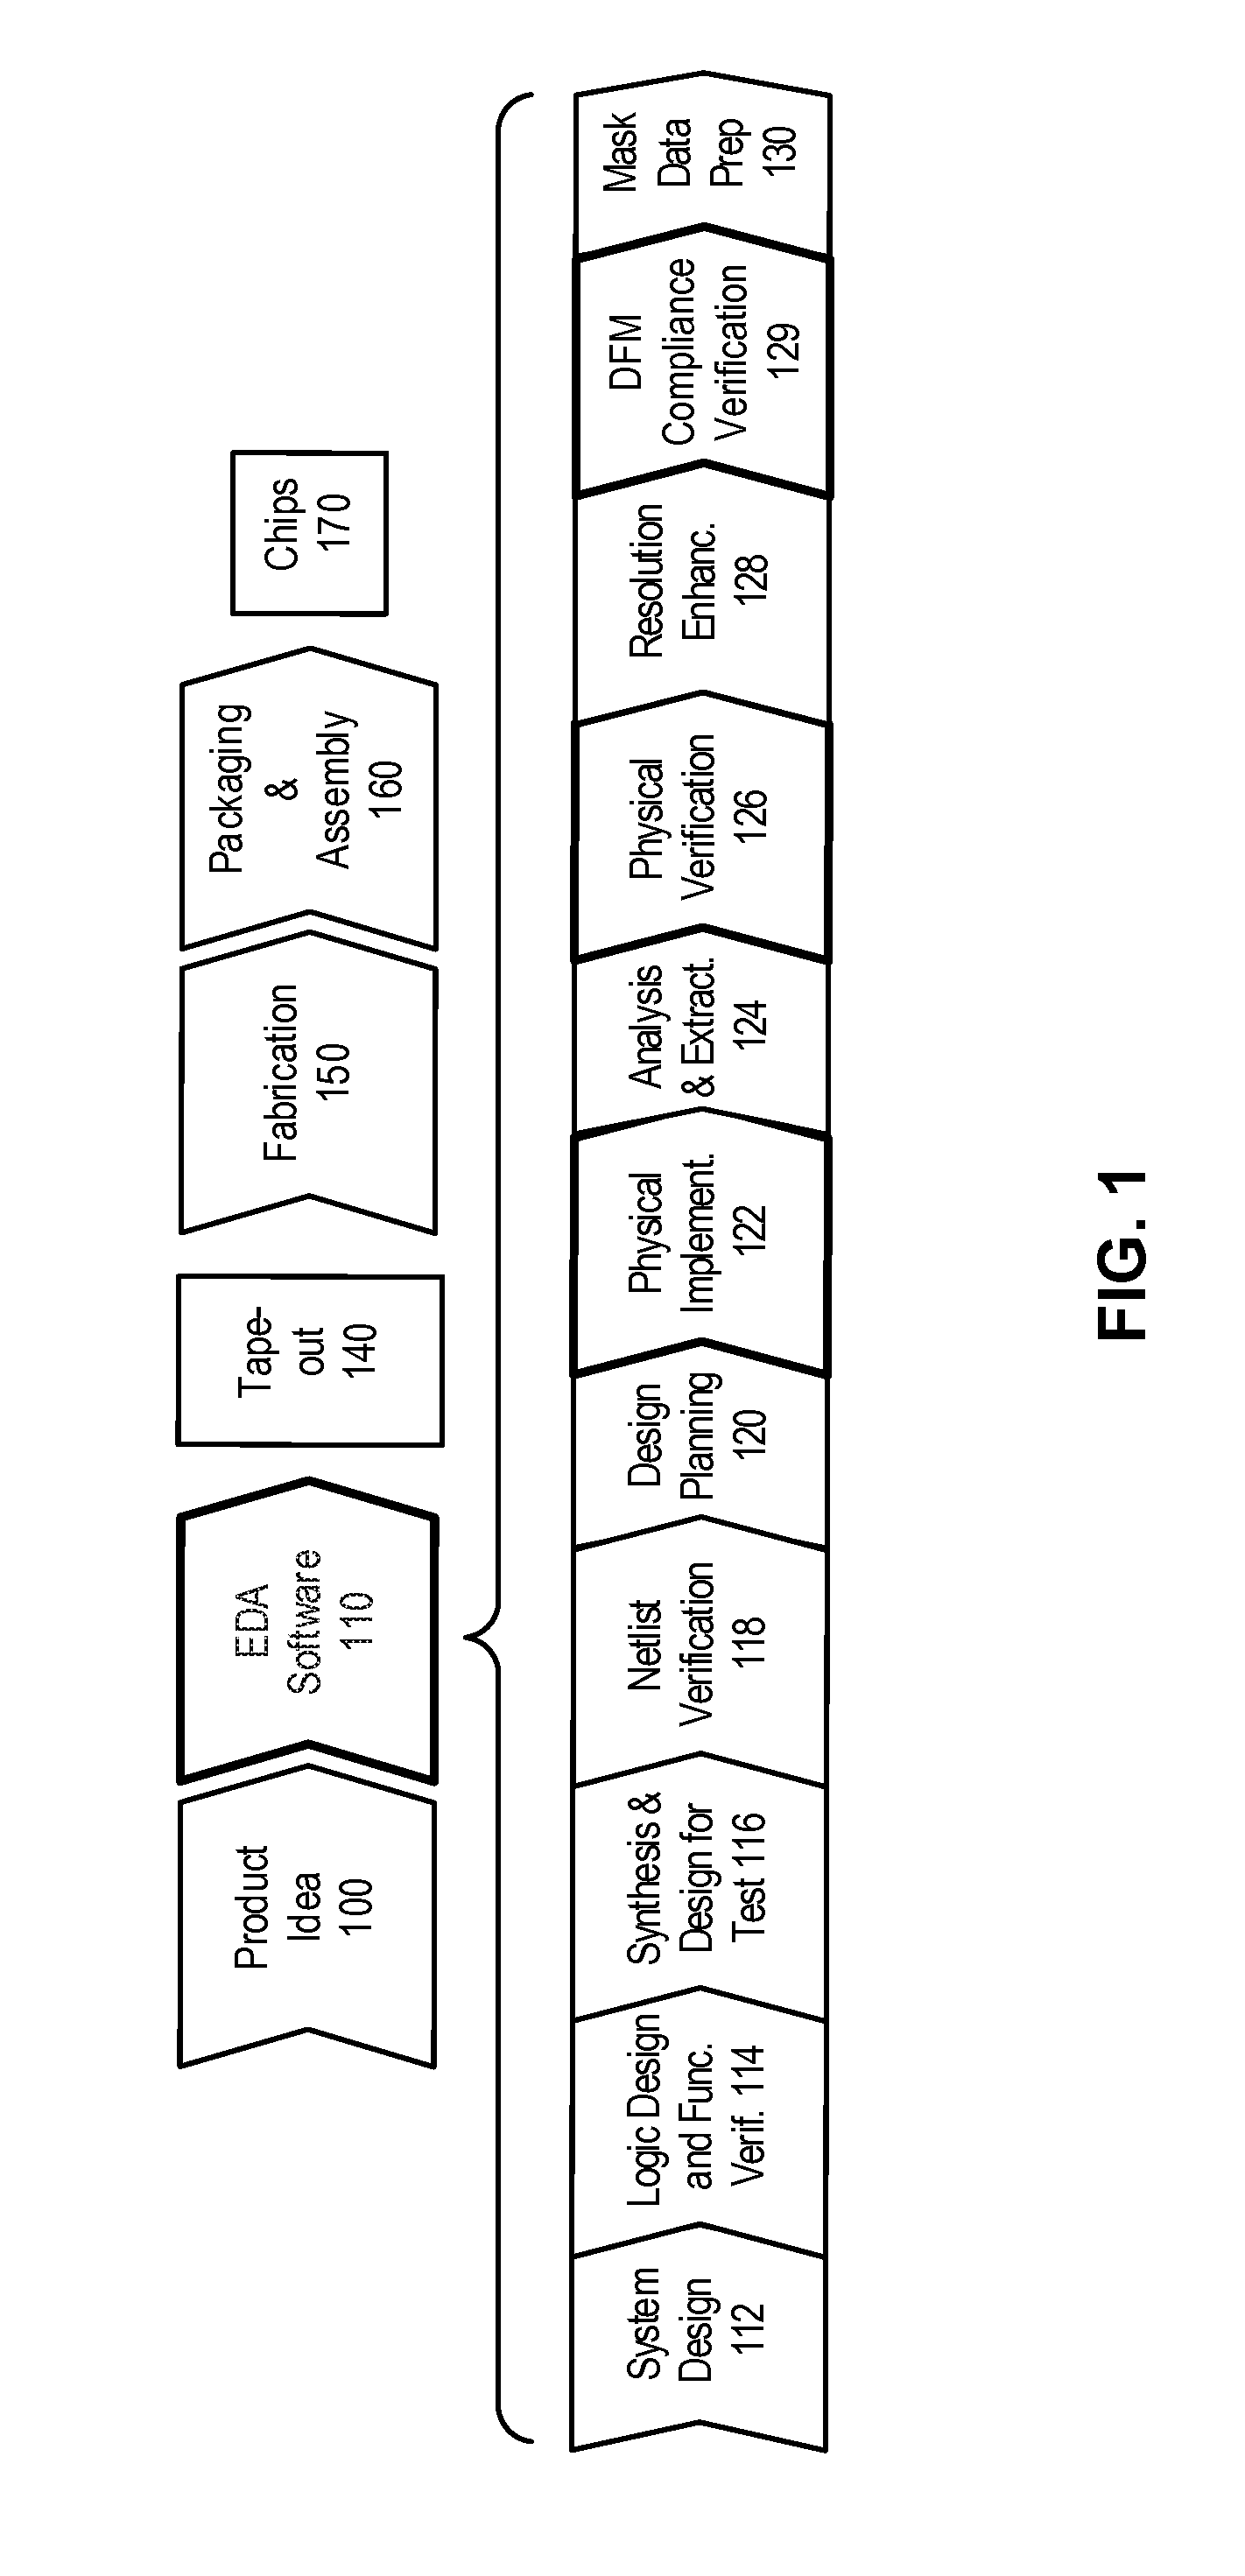 Method and apparatus for performing via array merging and parasitic extraction